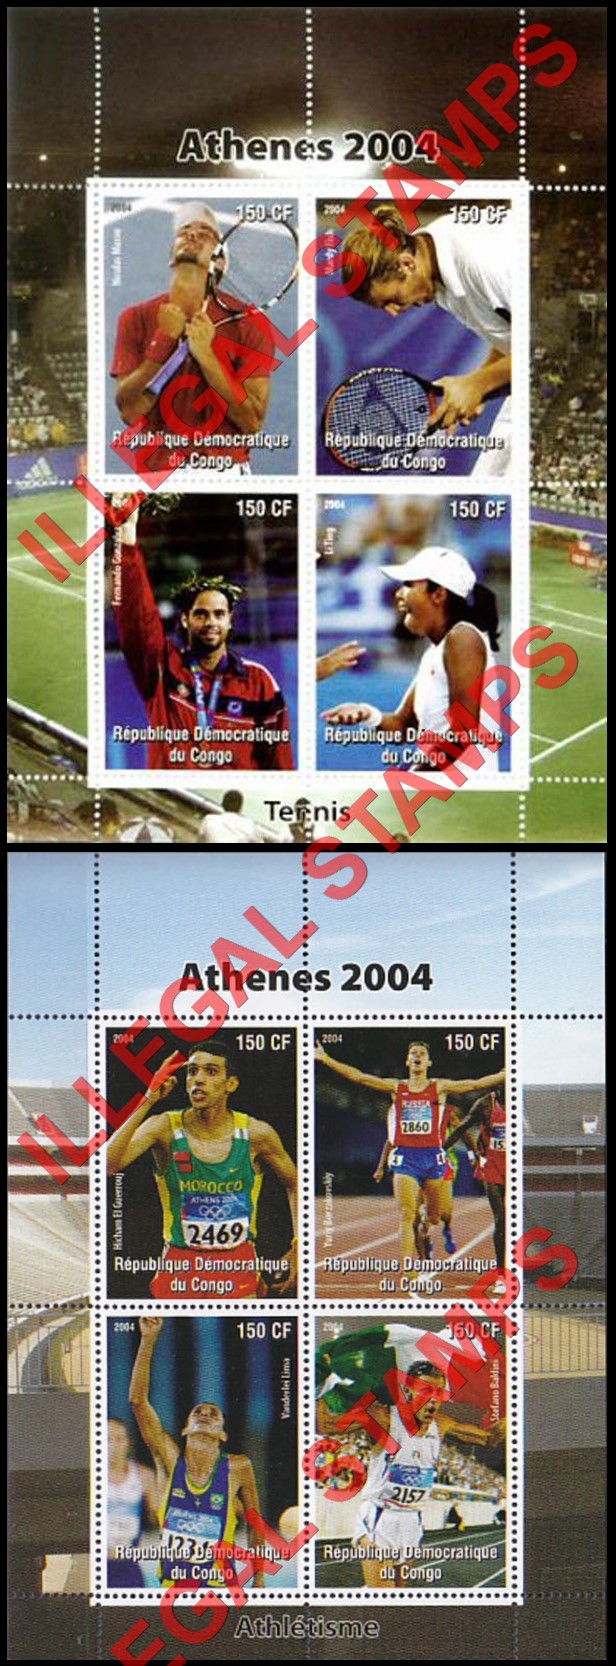 Congo Democratic Republic 2004 Olympic Games in Athens Illegal Stamp Souvenir Sheets of 4 (Part 3)